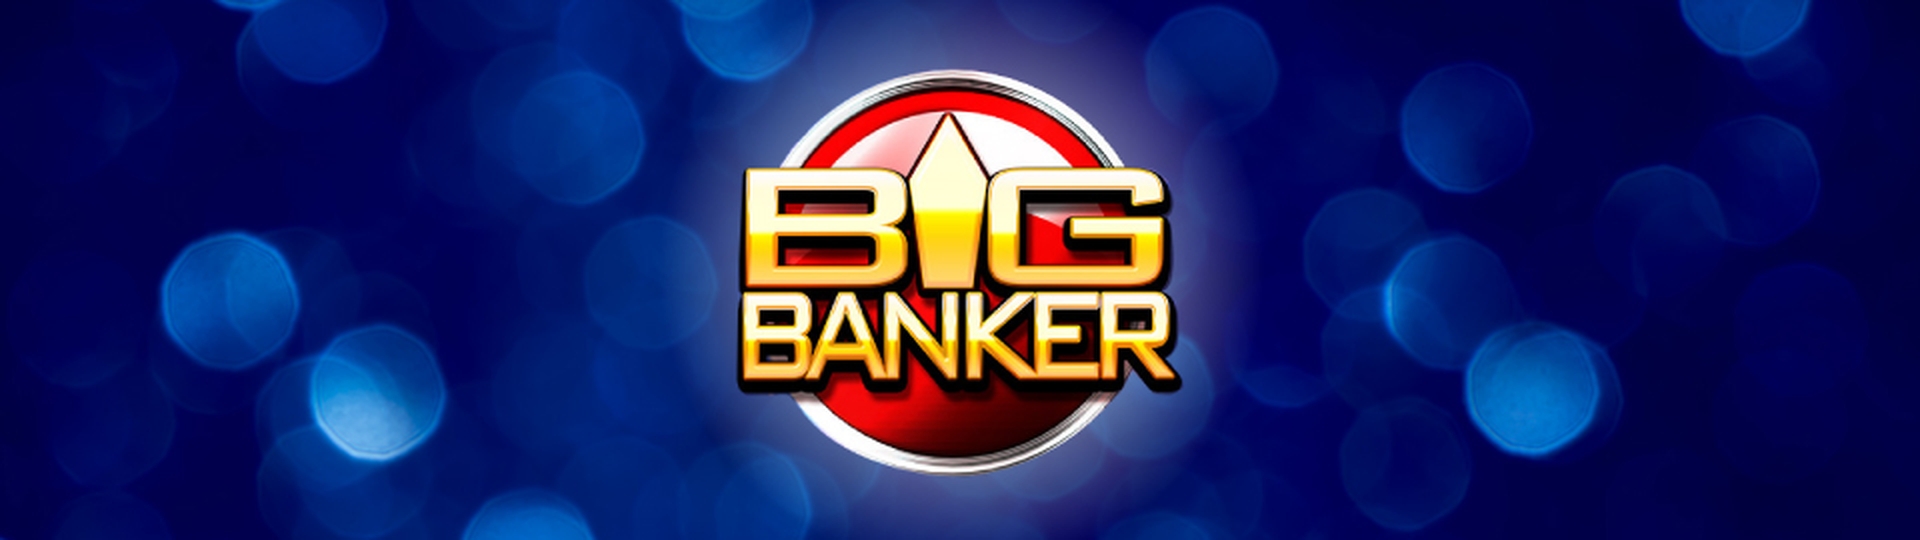 The Big Banker Online Slot Demo Game by CR Games